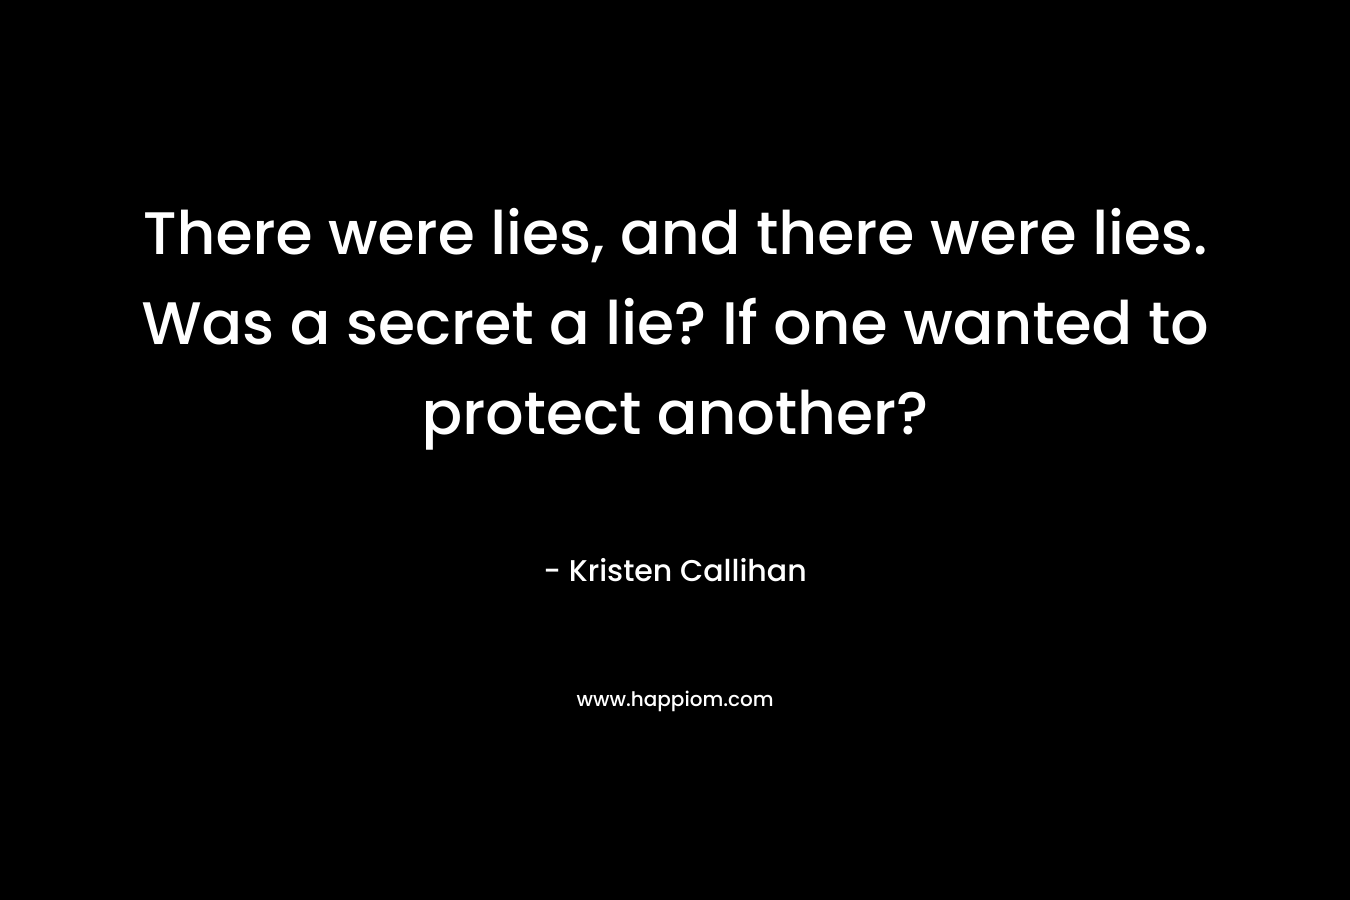 There were lies, and there were lies. Was a secret a lie? If one wanted to protect another?